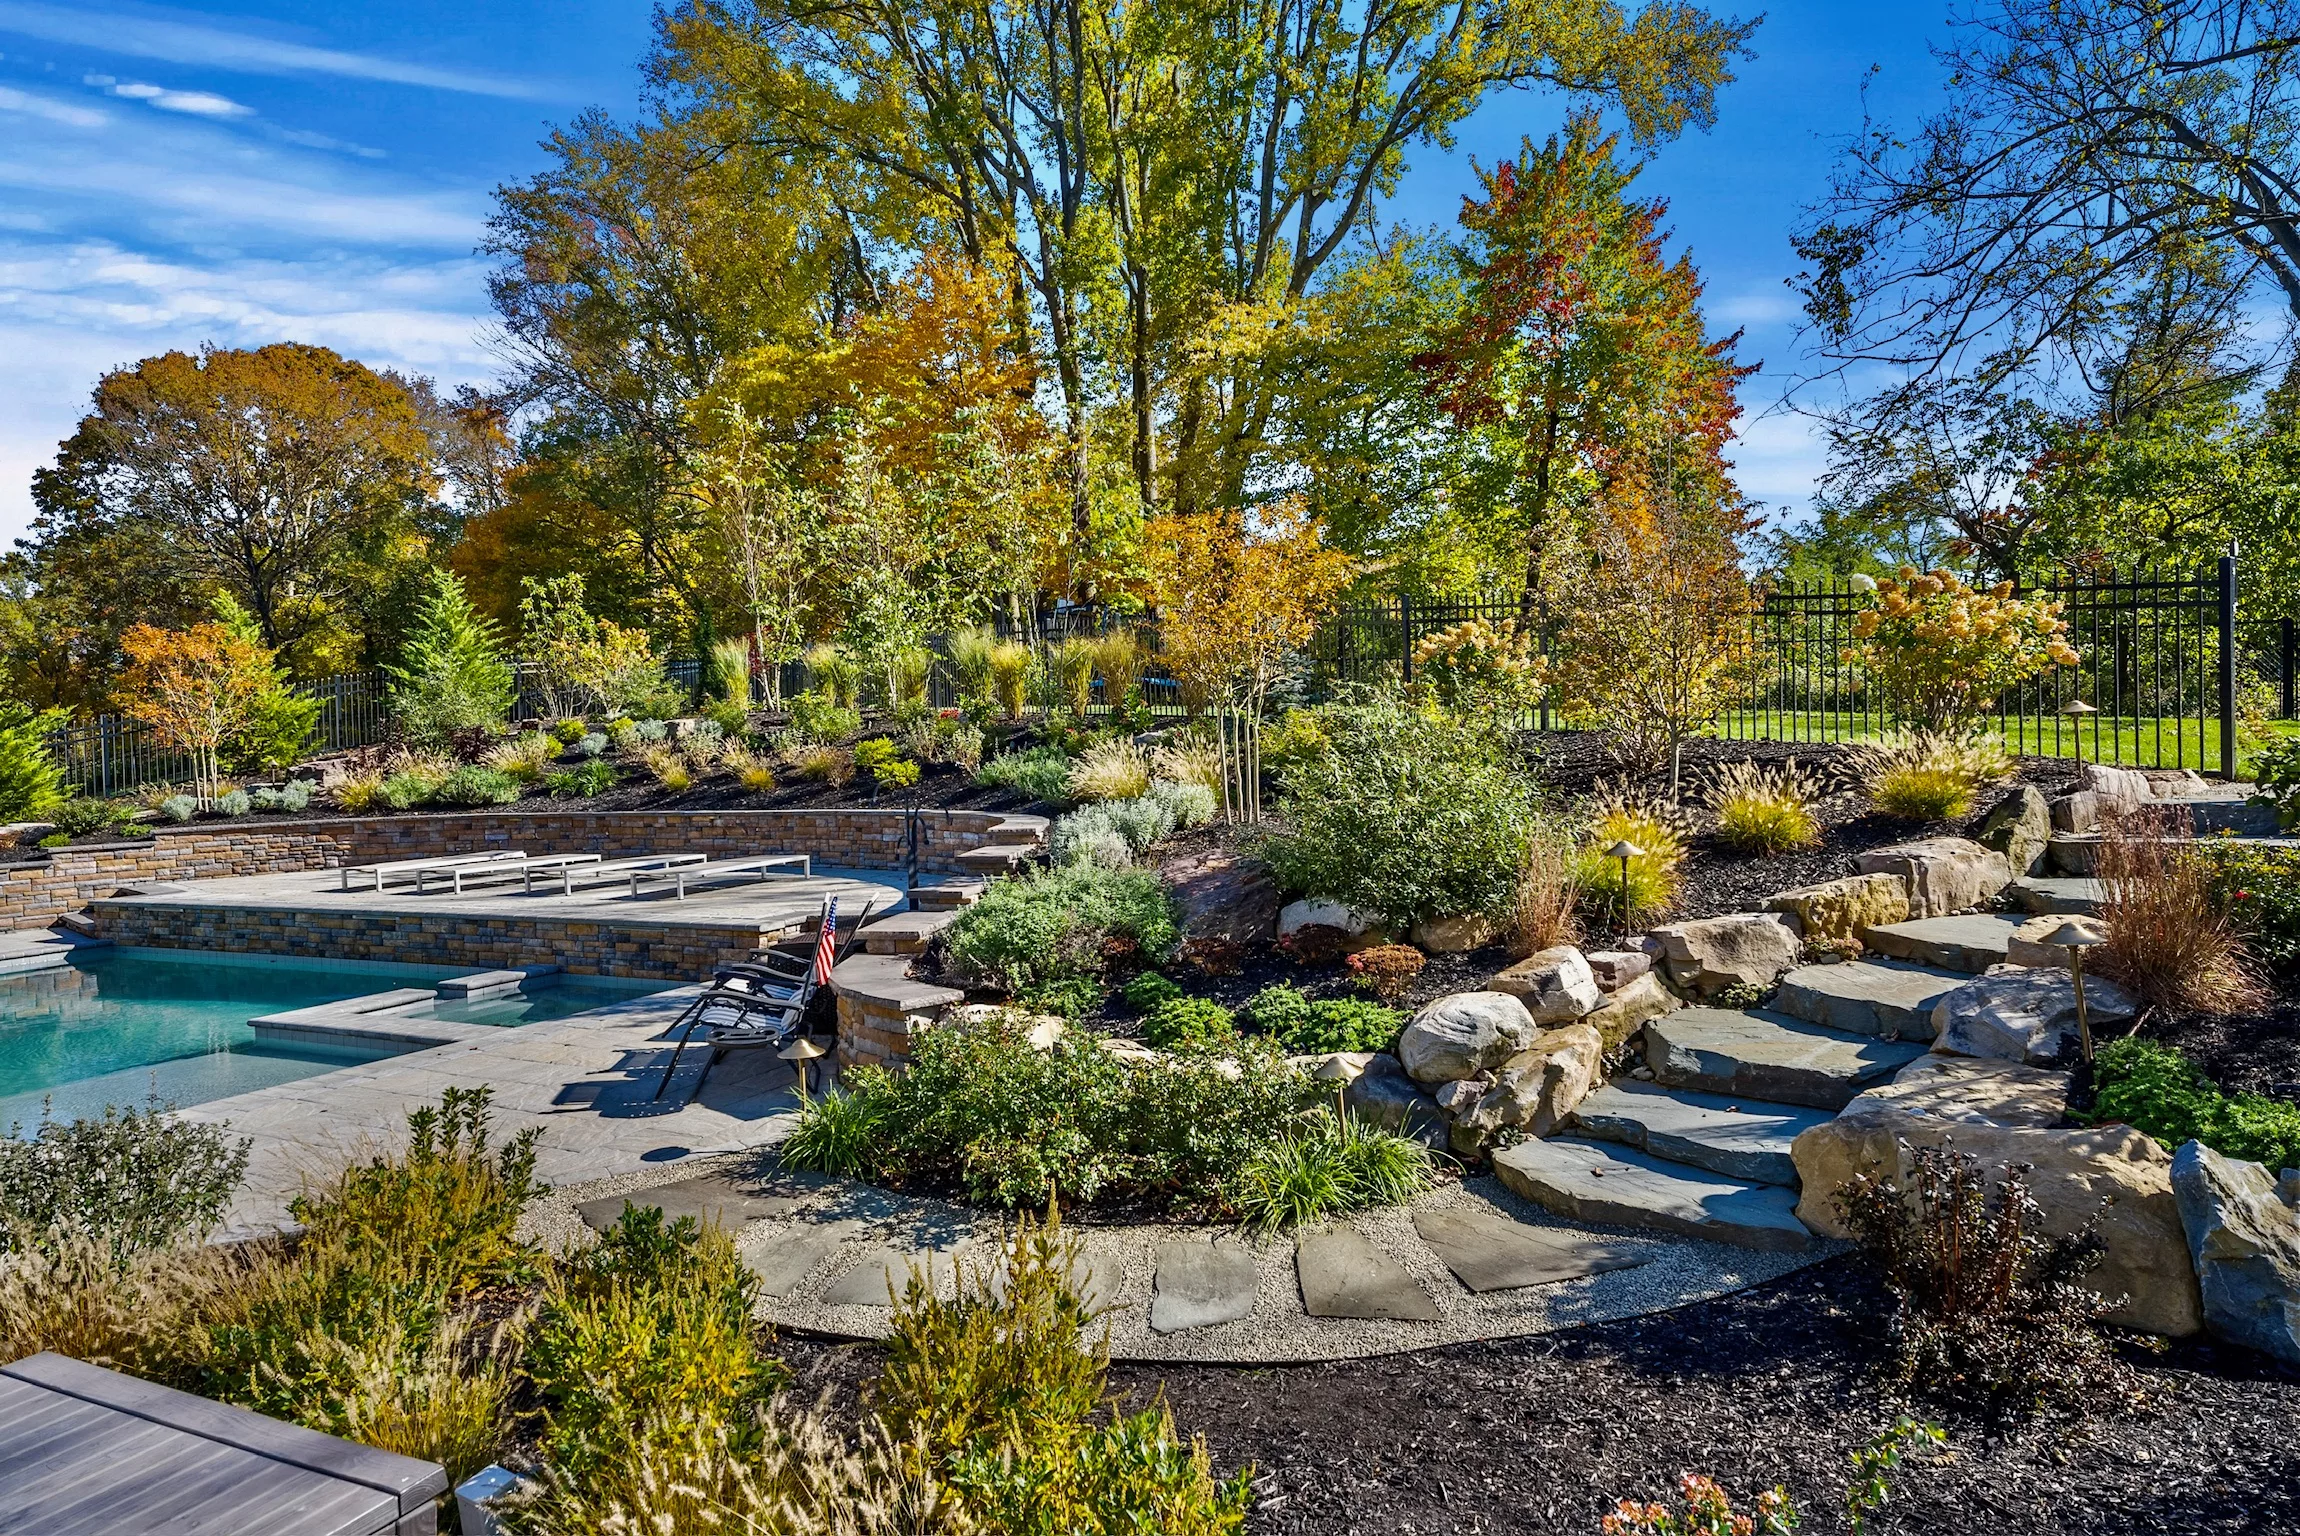 Stunning backyard pool surrounded by natural rock formations, landscaped garden beds, and a stone pathway under vibrant autumn trees.